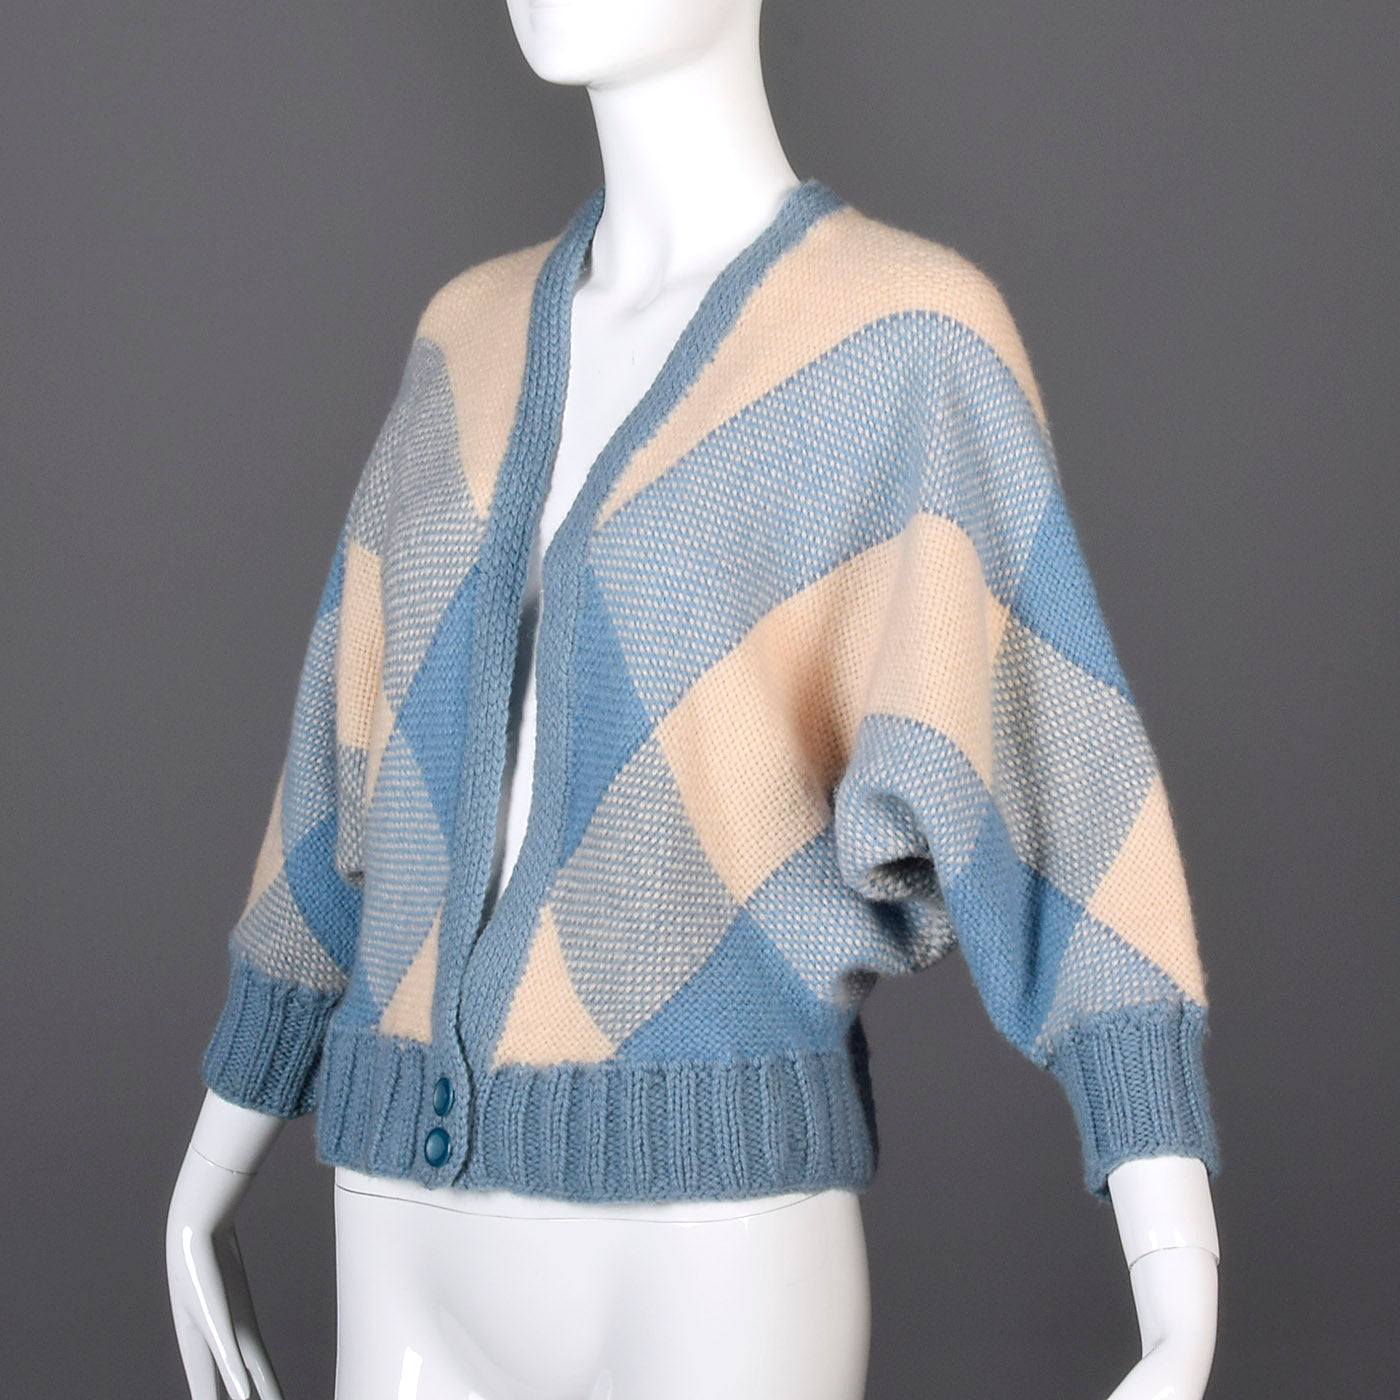 1950s Dolman Sleeve Cardigan in Blue and Cream